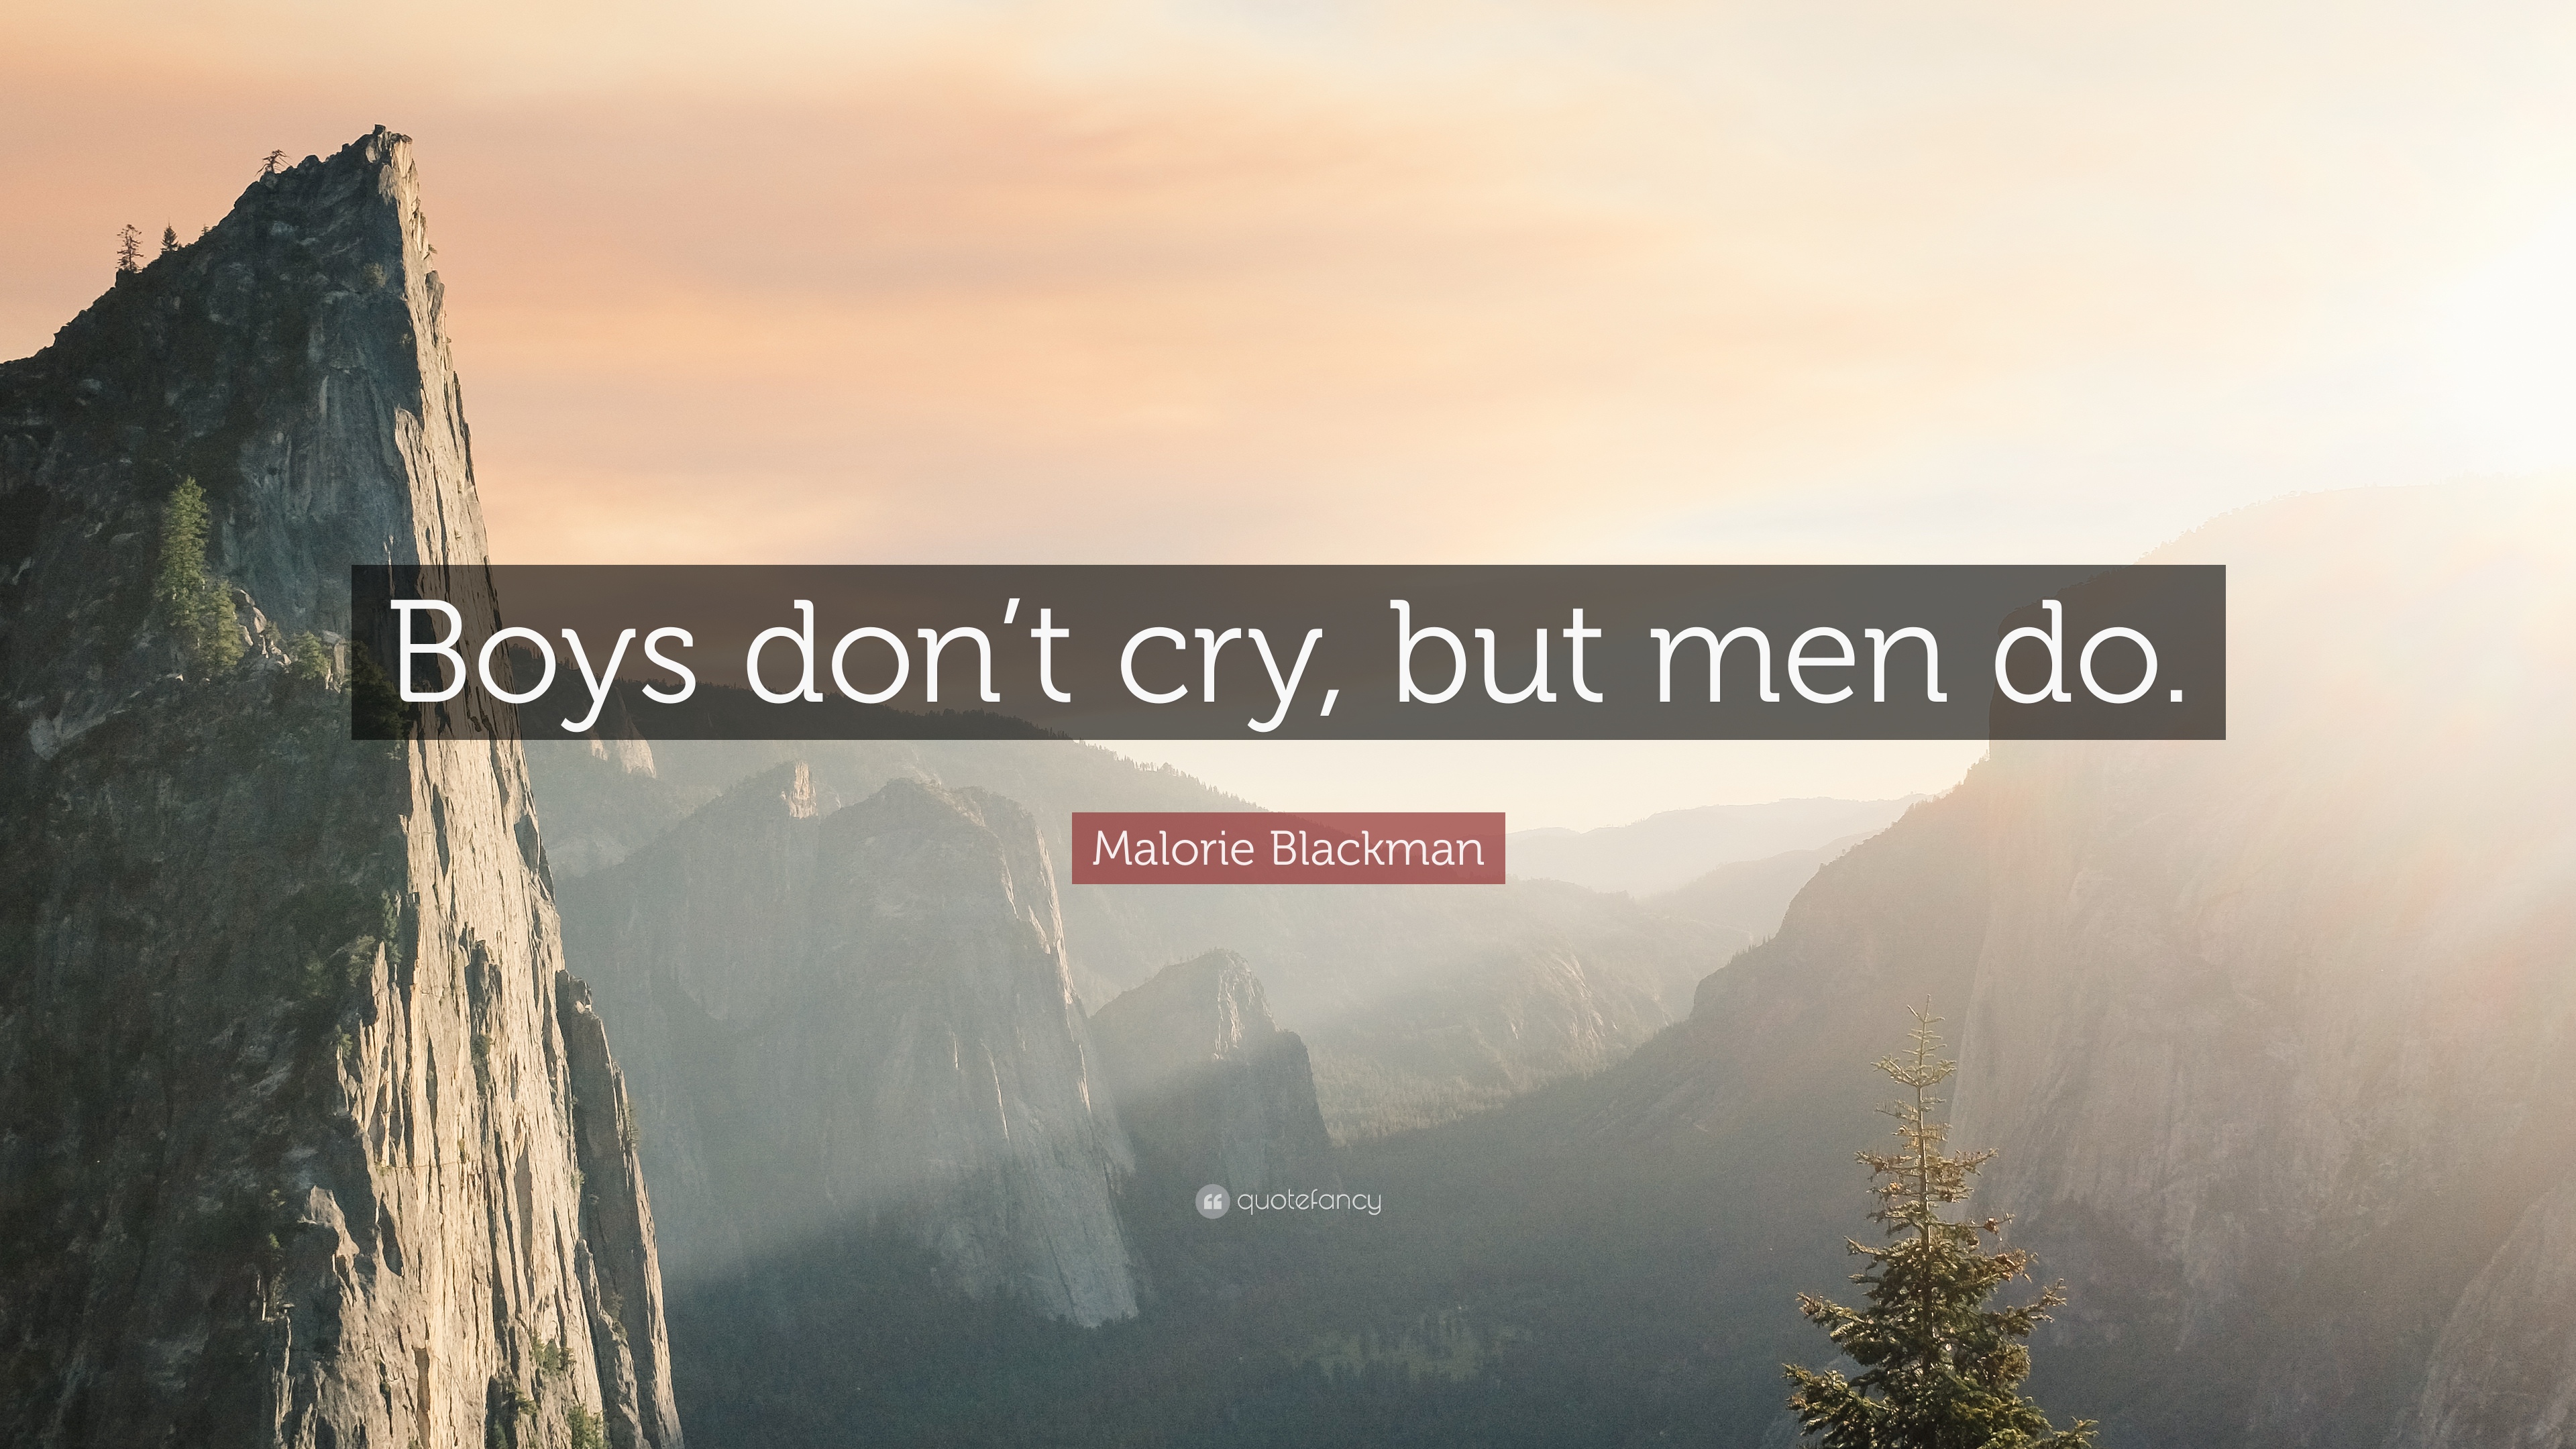 Malorie Blackman Quote: “Boys don't cry, but men do.”